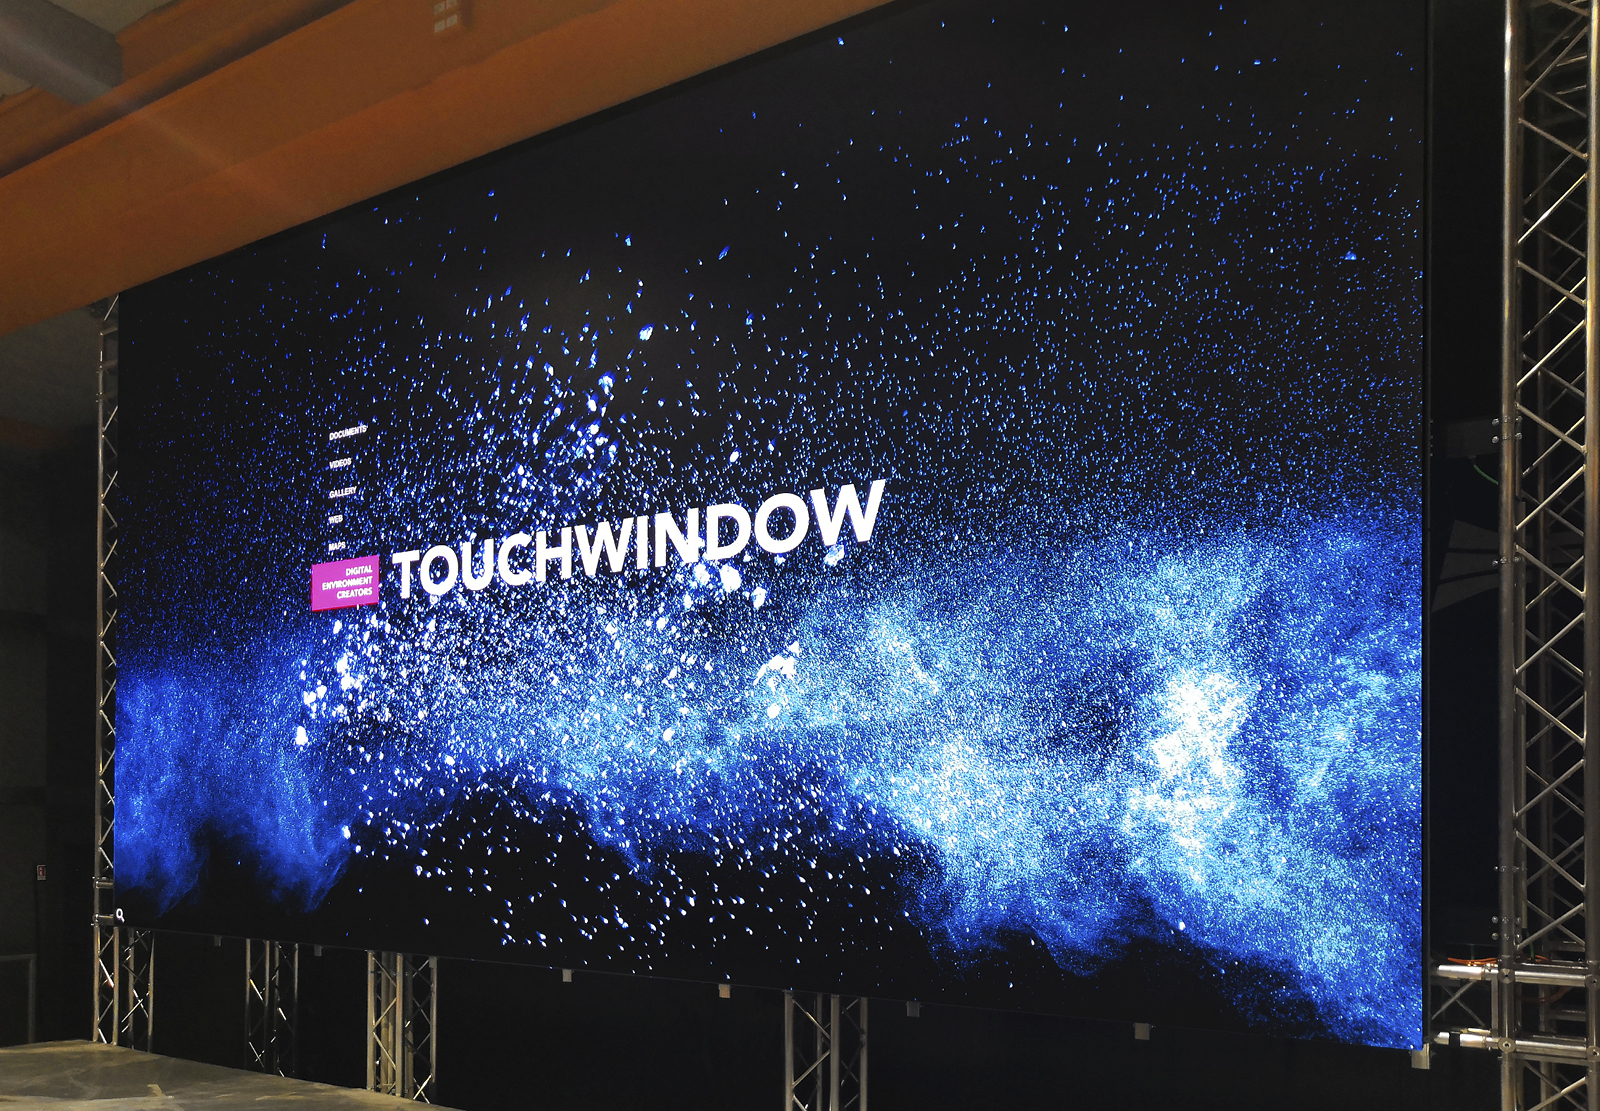 Touchwindow - A historic building becames an Auditorium